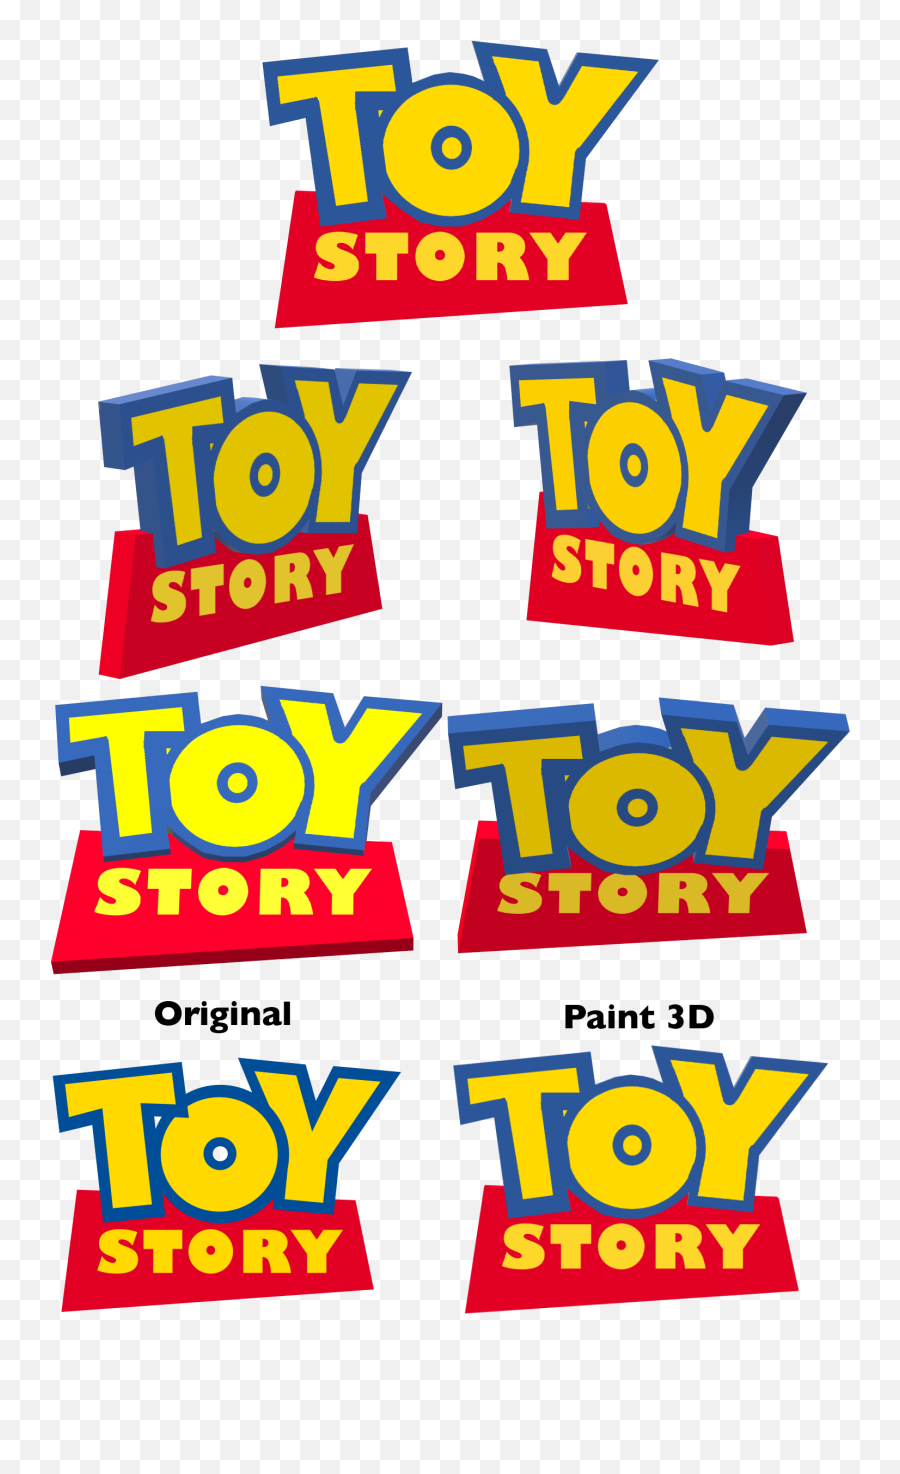 I Recreated The Toy Story Logo In Paint - Toy Story 3 Logo Png,Toy Story 3 Logo